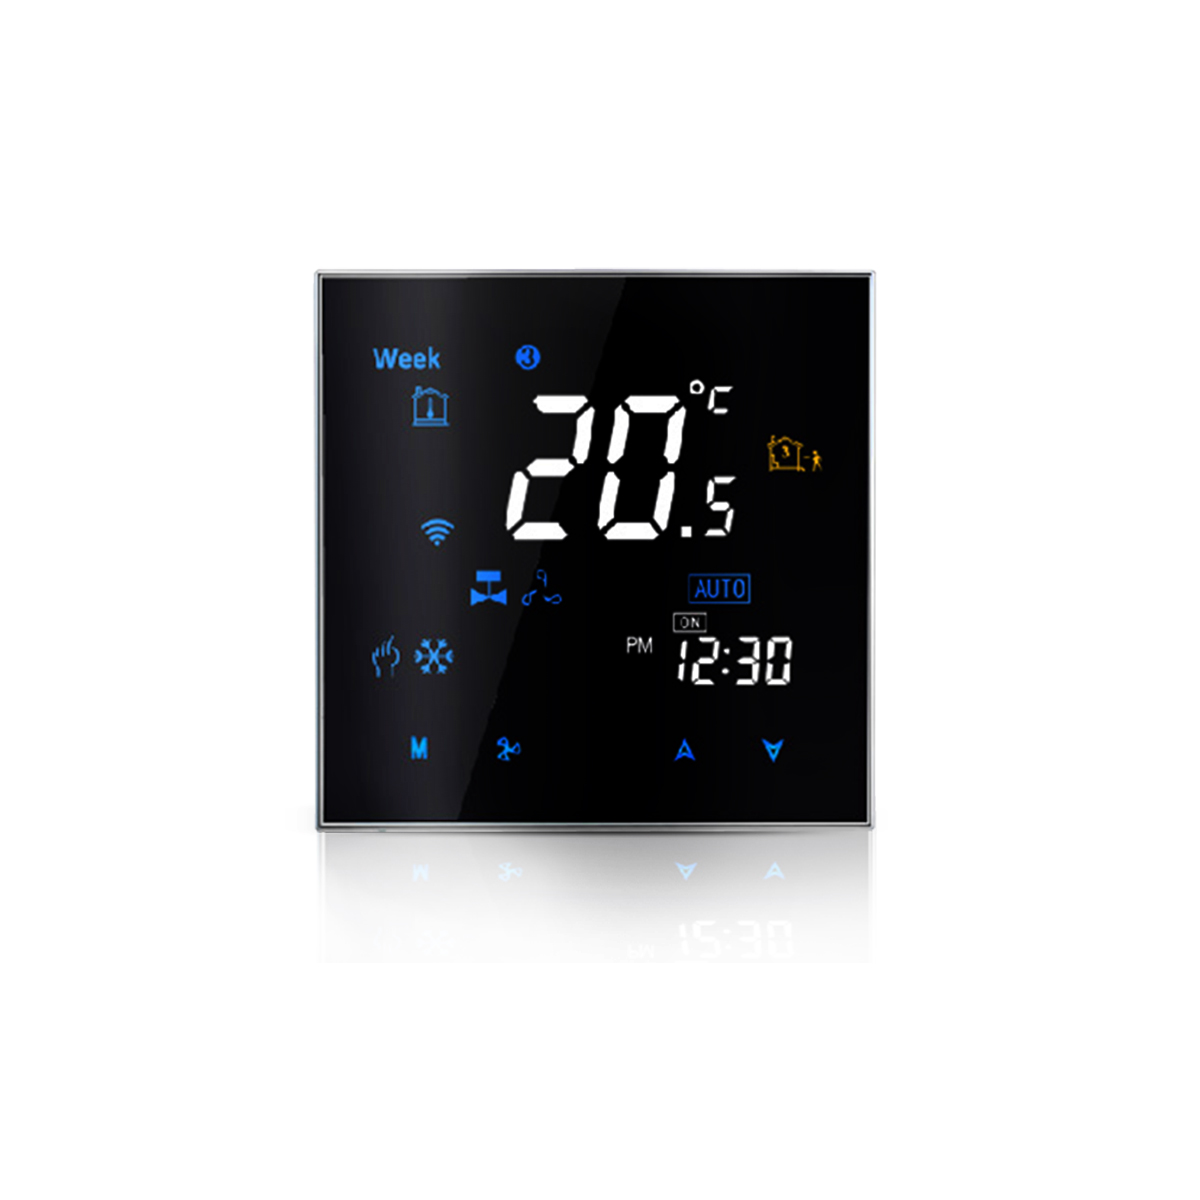 BAC-3000 Series Room Smart Thermostat